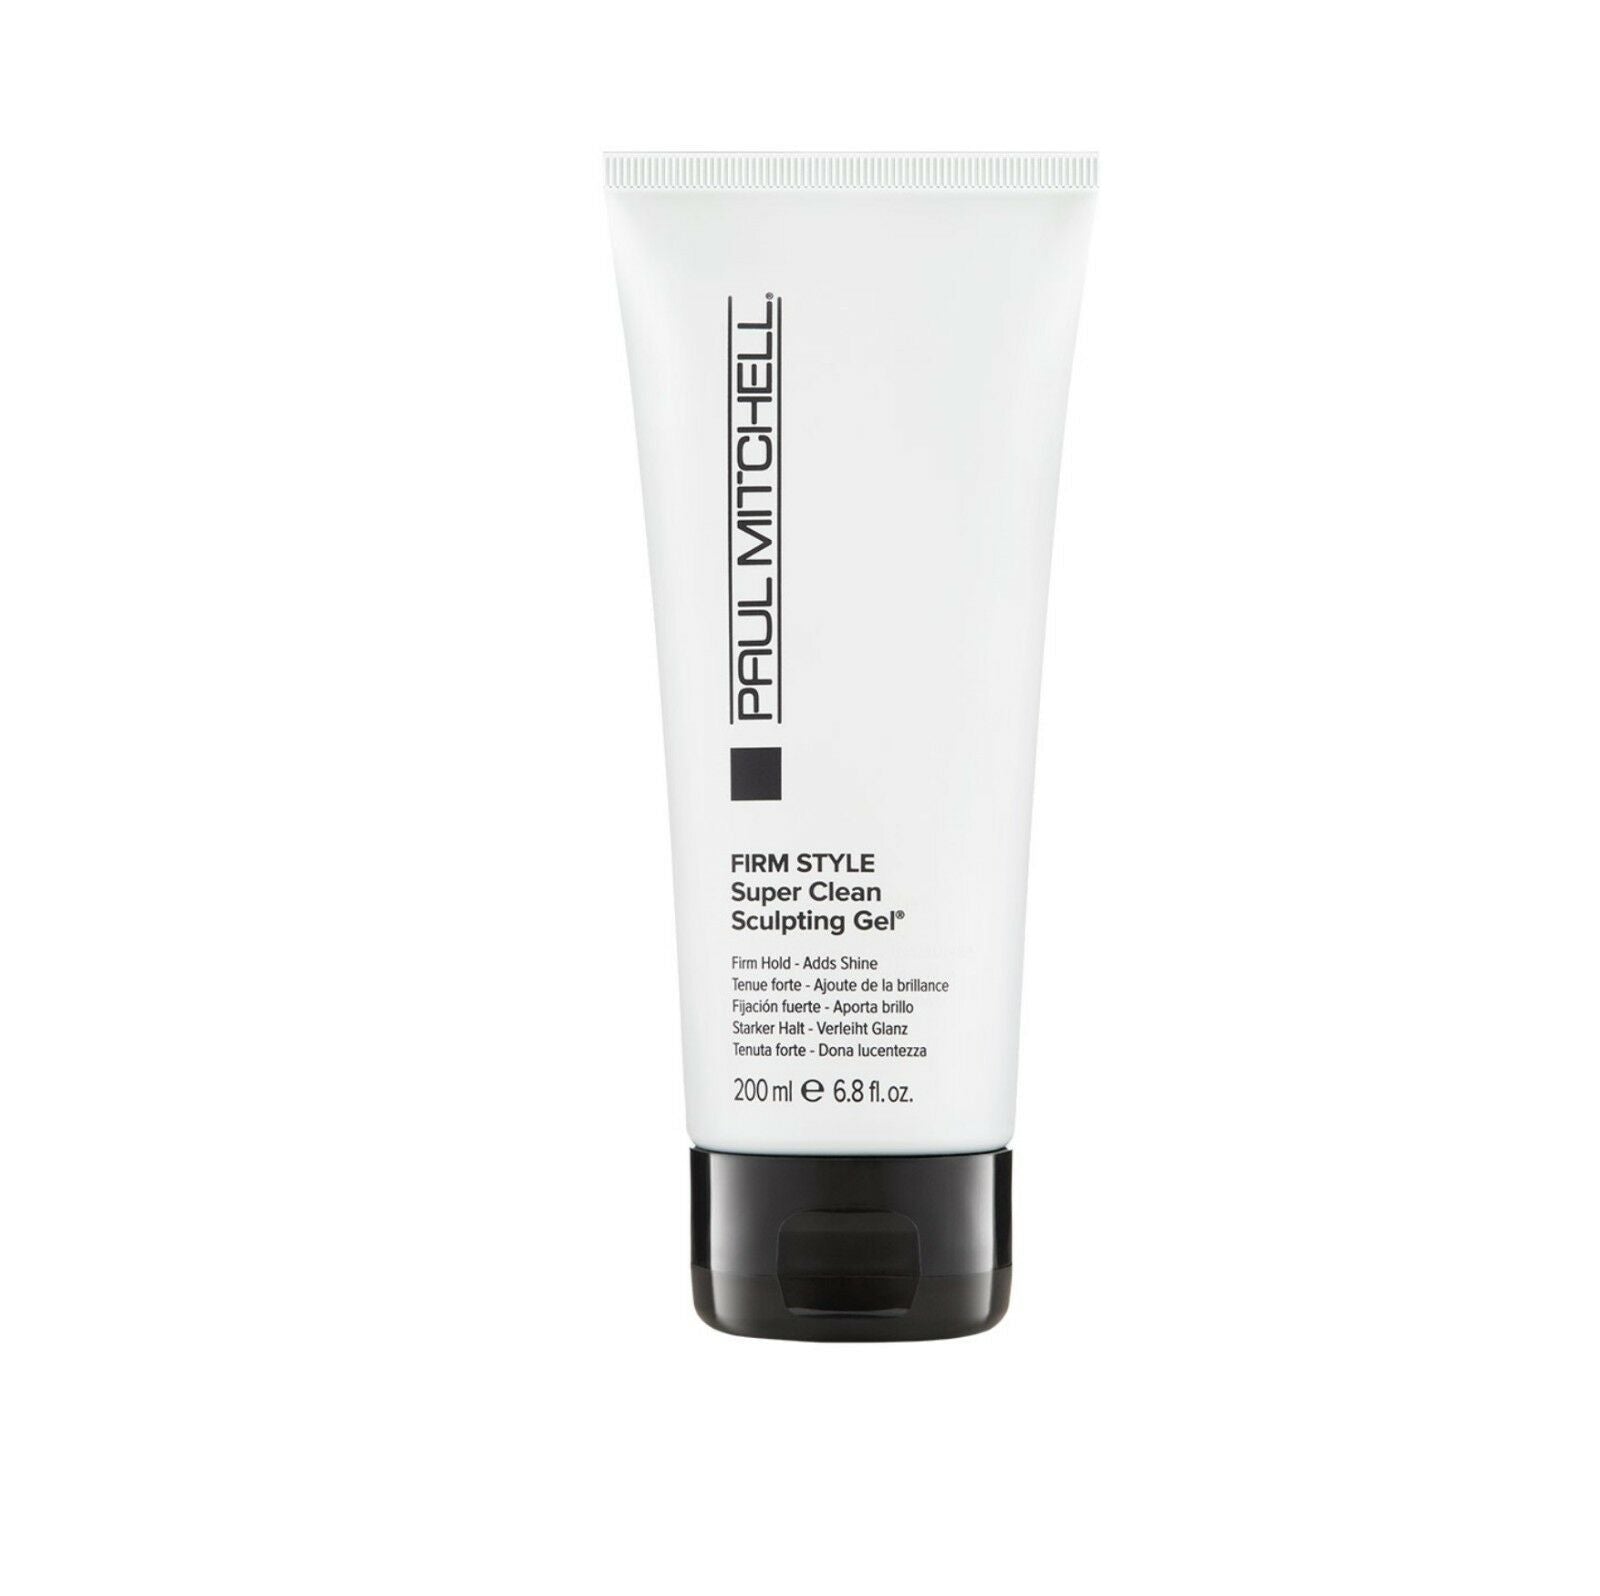 Paul Mitchell Extra-Body Sculpting Gel Firm Hold 200ml x 2 - On Line Hair Depot